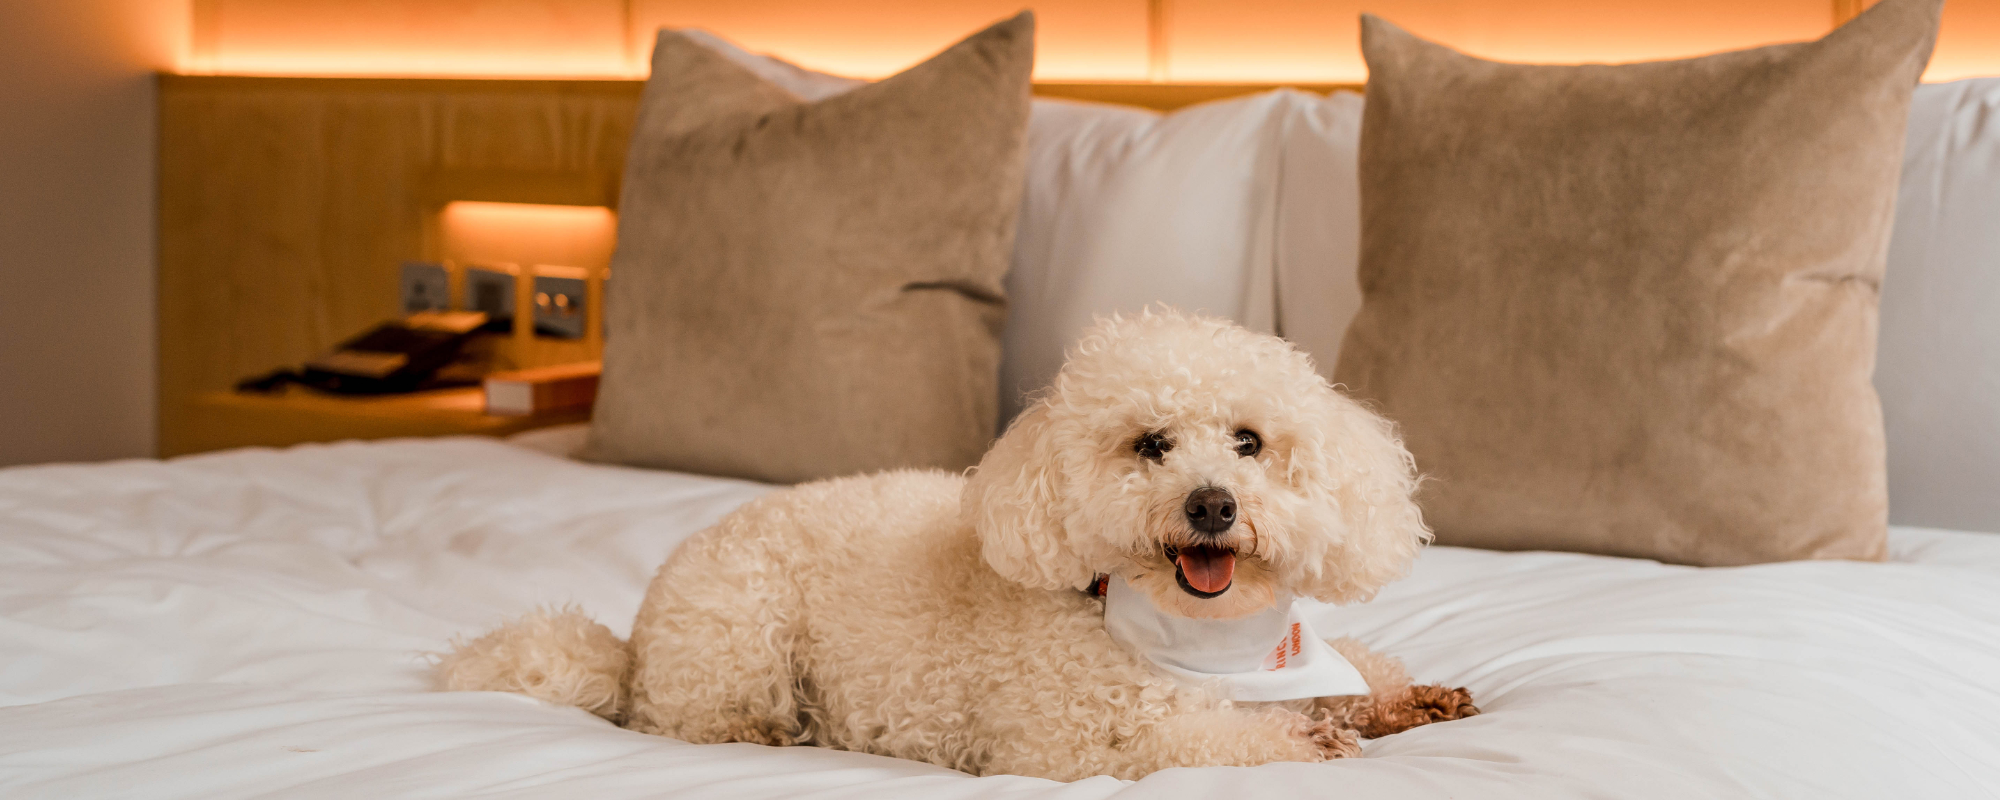 Cute dog on hotel bed